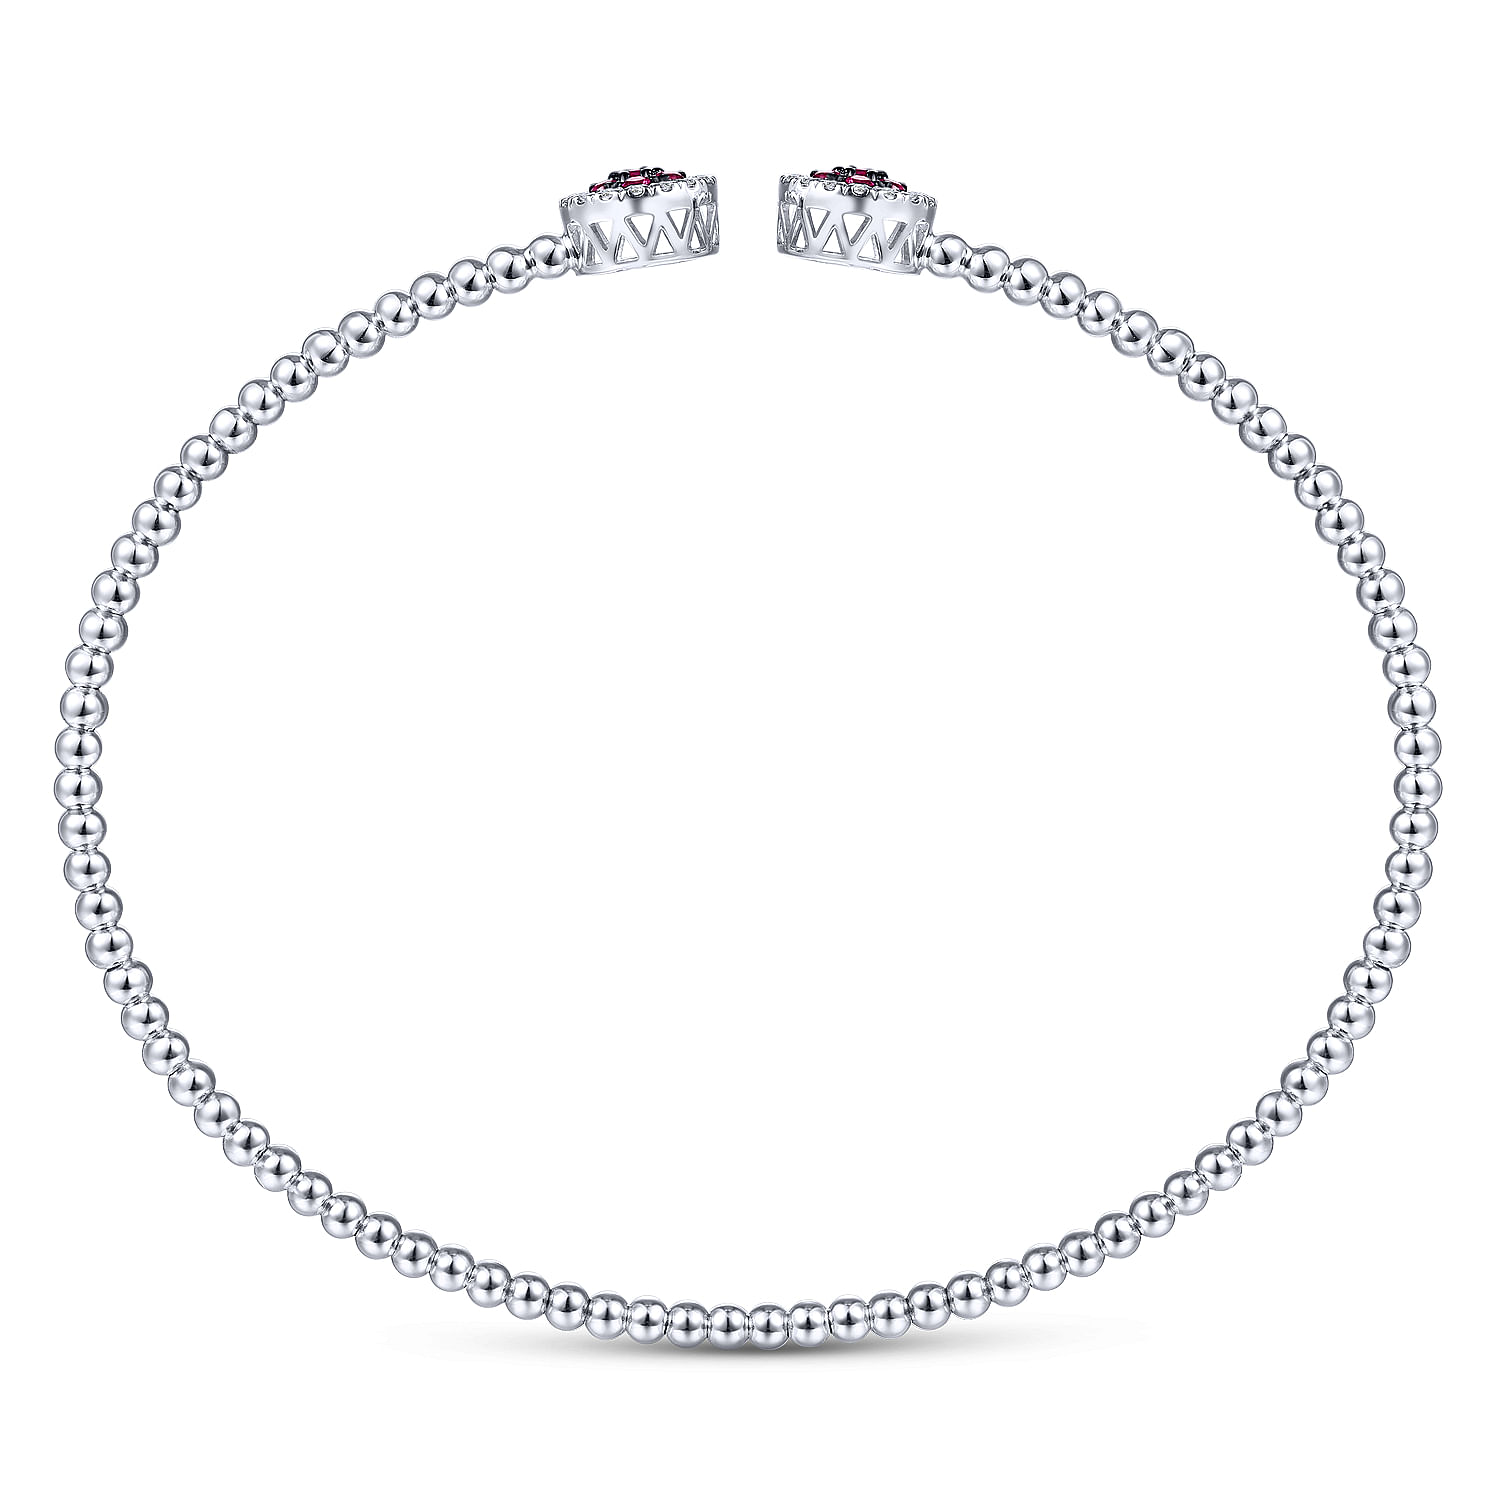 14K White Gold Bujukan Bead Cuff Bracelet with Ruby and Diamond Halo Caps - 0.16 ct - Shot 3